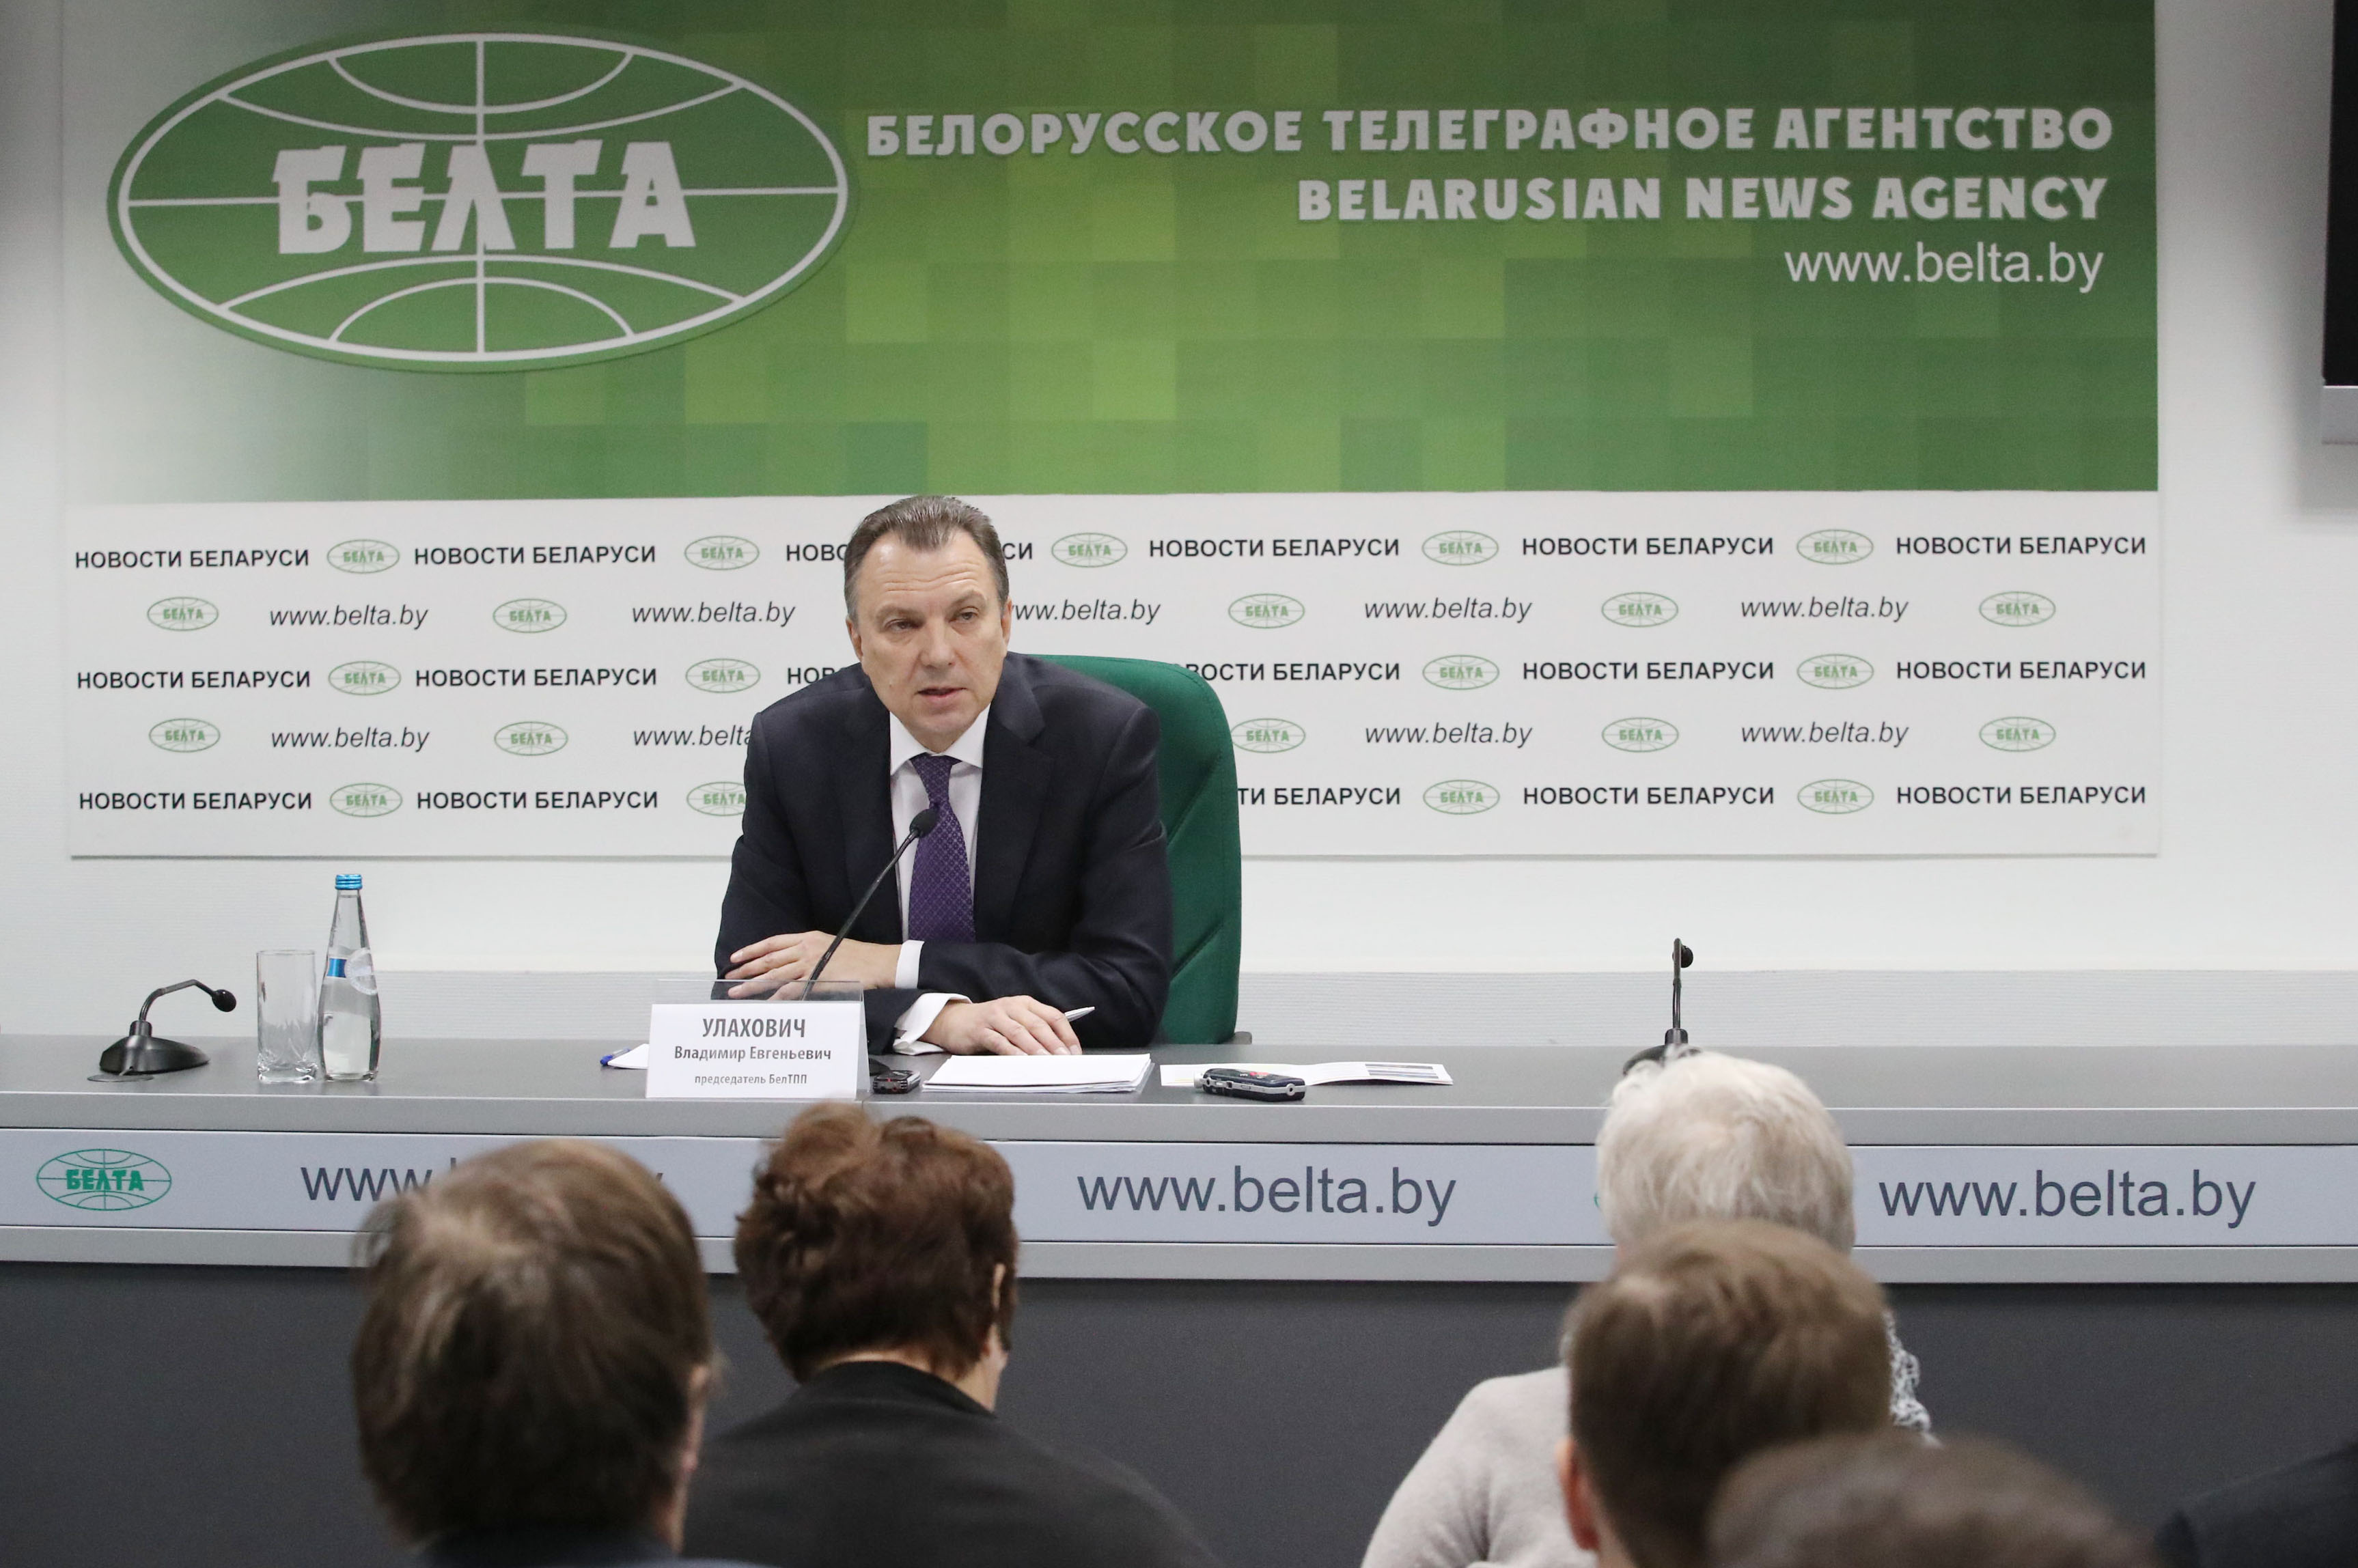 BelCCI Chairman Vladimir Ulakhovich gives a press conference at BelTA